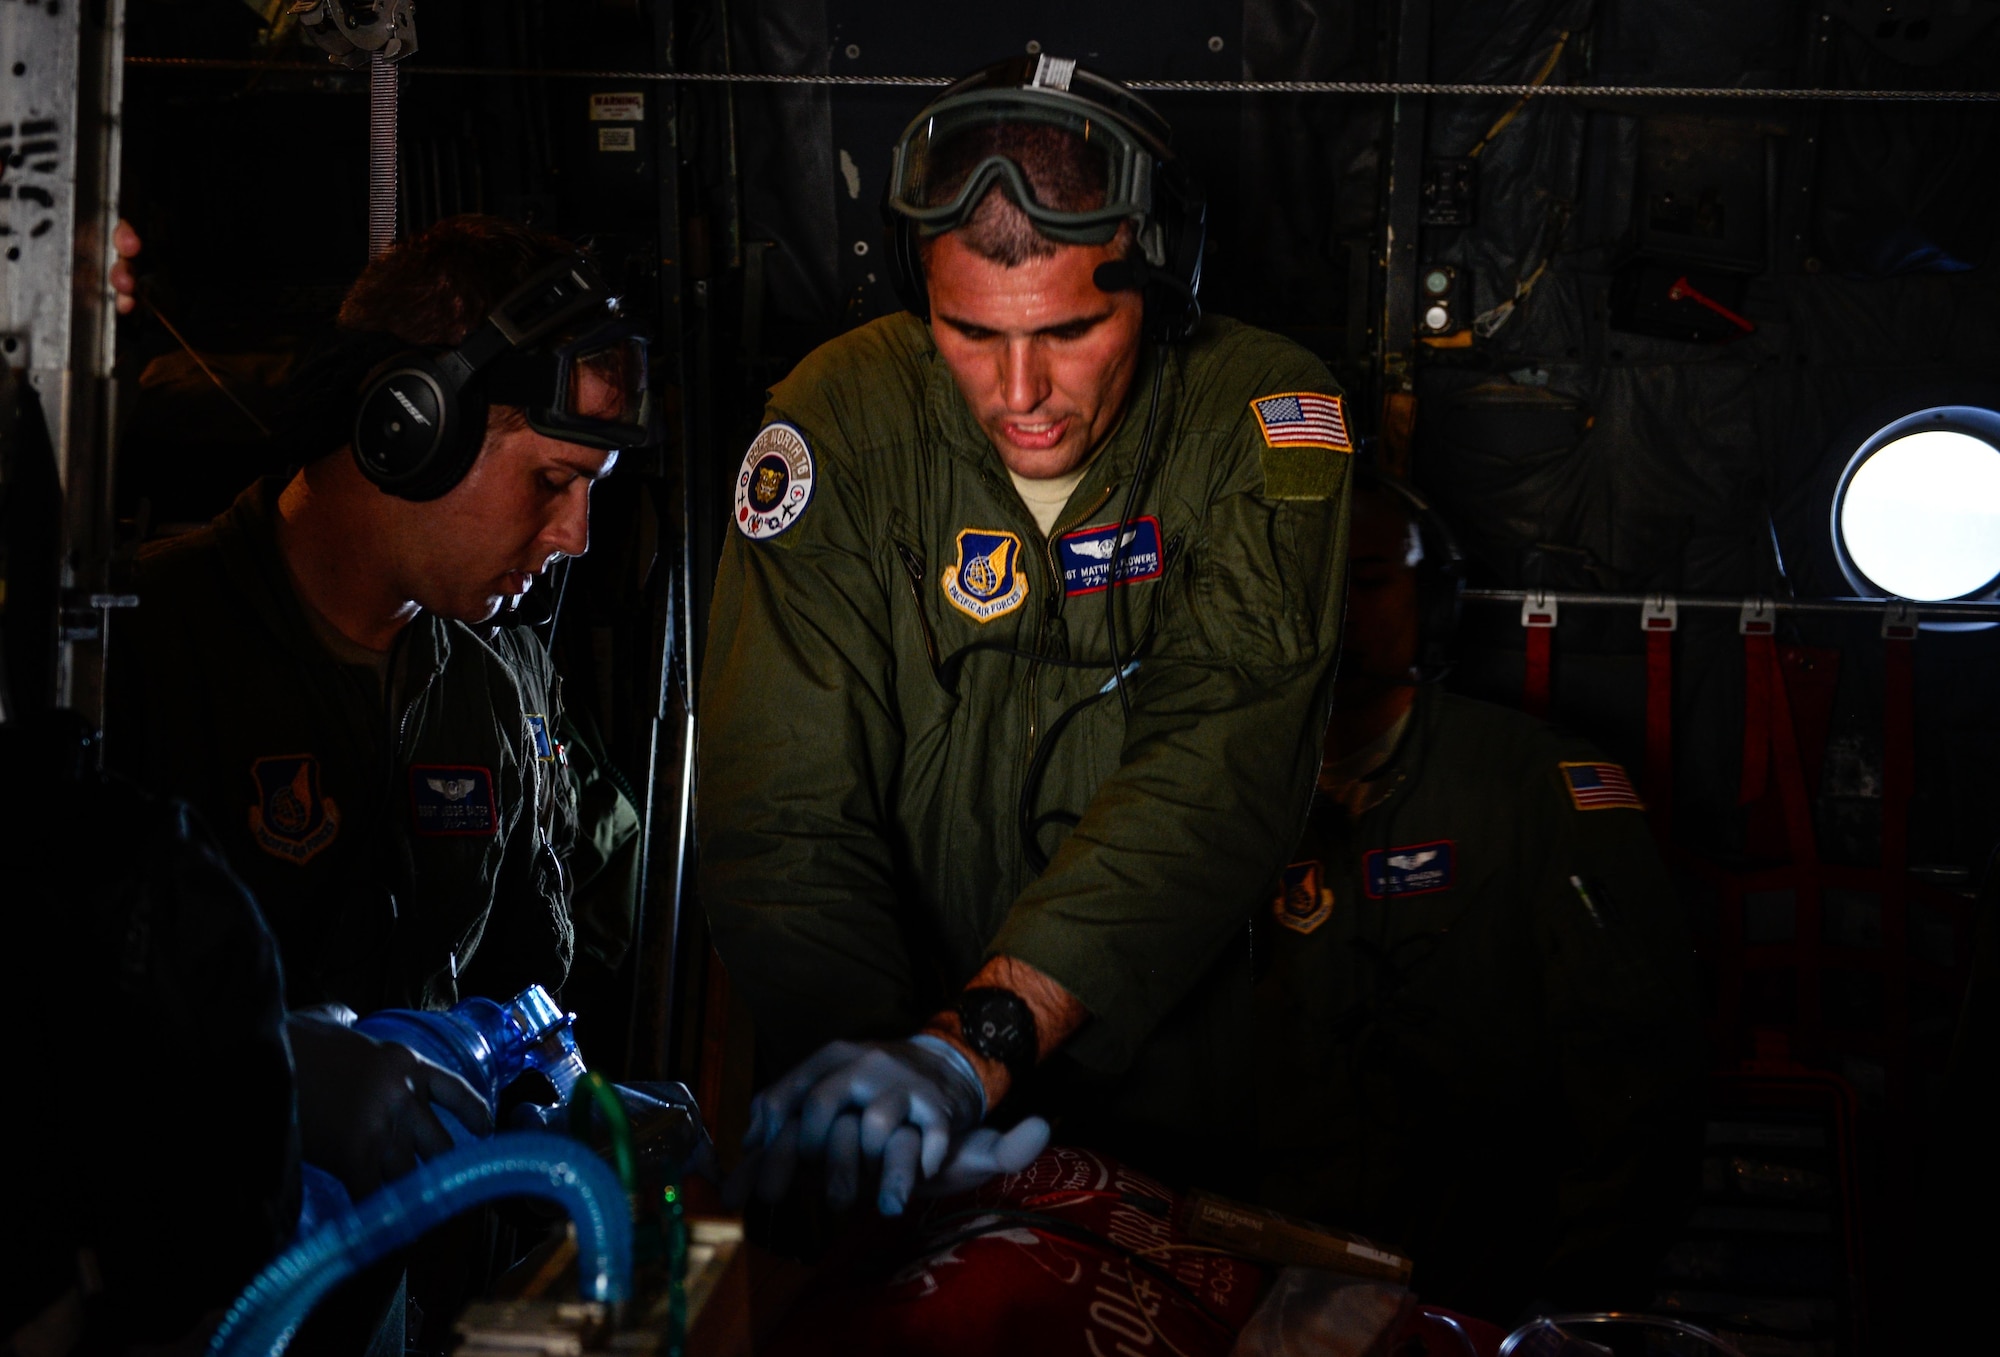 Staff Sgt. Matthew Flowers, an aeromedical evacuation technician with the 18th Aeromedical Evacuation Squadron, performs simulated CPR aboard a U.S. Air Force C-130 Hercules Feb. 15, 2016, during an expeditionary medical support exercise over the Pacific Ocean near Guam. Exercise Cope North 16 enhances humanitarian assistance and disaster relief crisis response capabilities between six nations and lays the foundation for regional cooperation during real-world contingencies in the Indo-Asia-Pacific region. (U.S. Air Force photo by Staff Sgt. Alexander W. Riedel/Released)